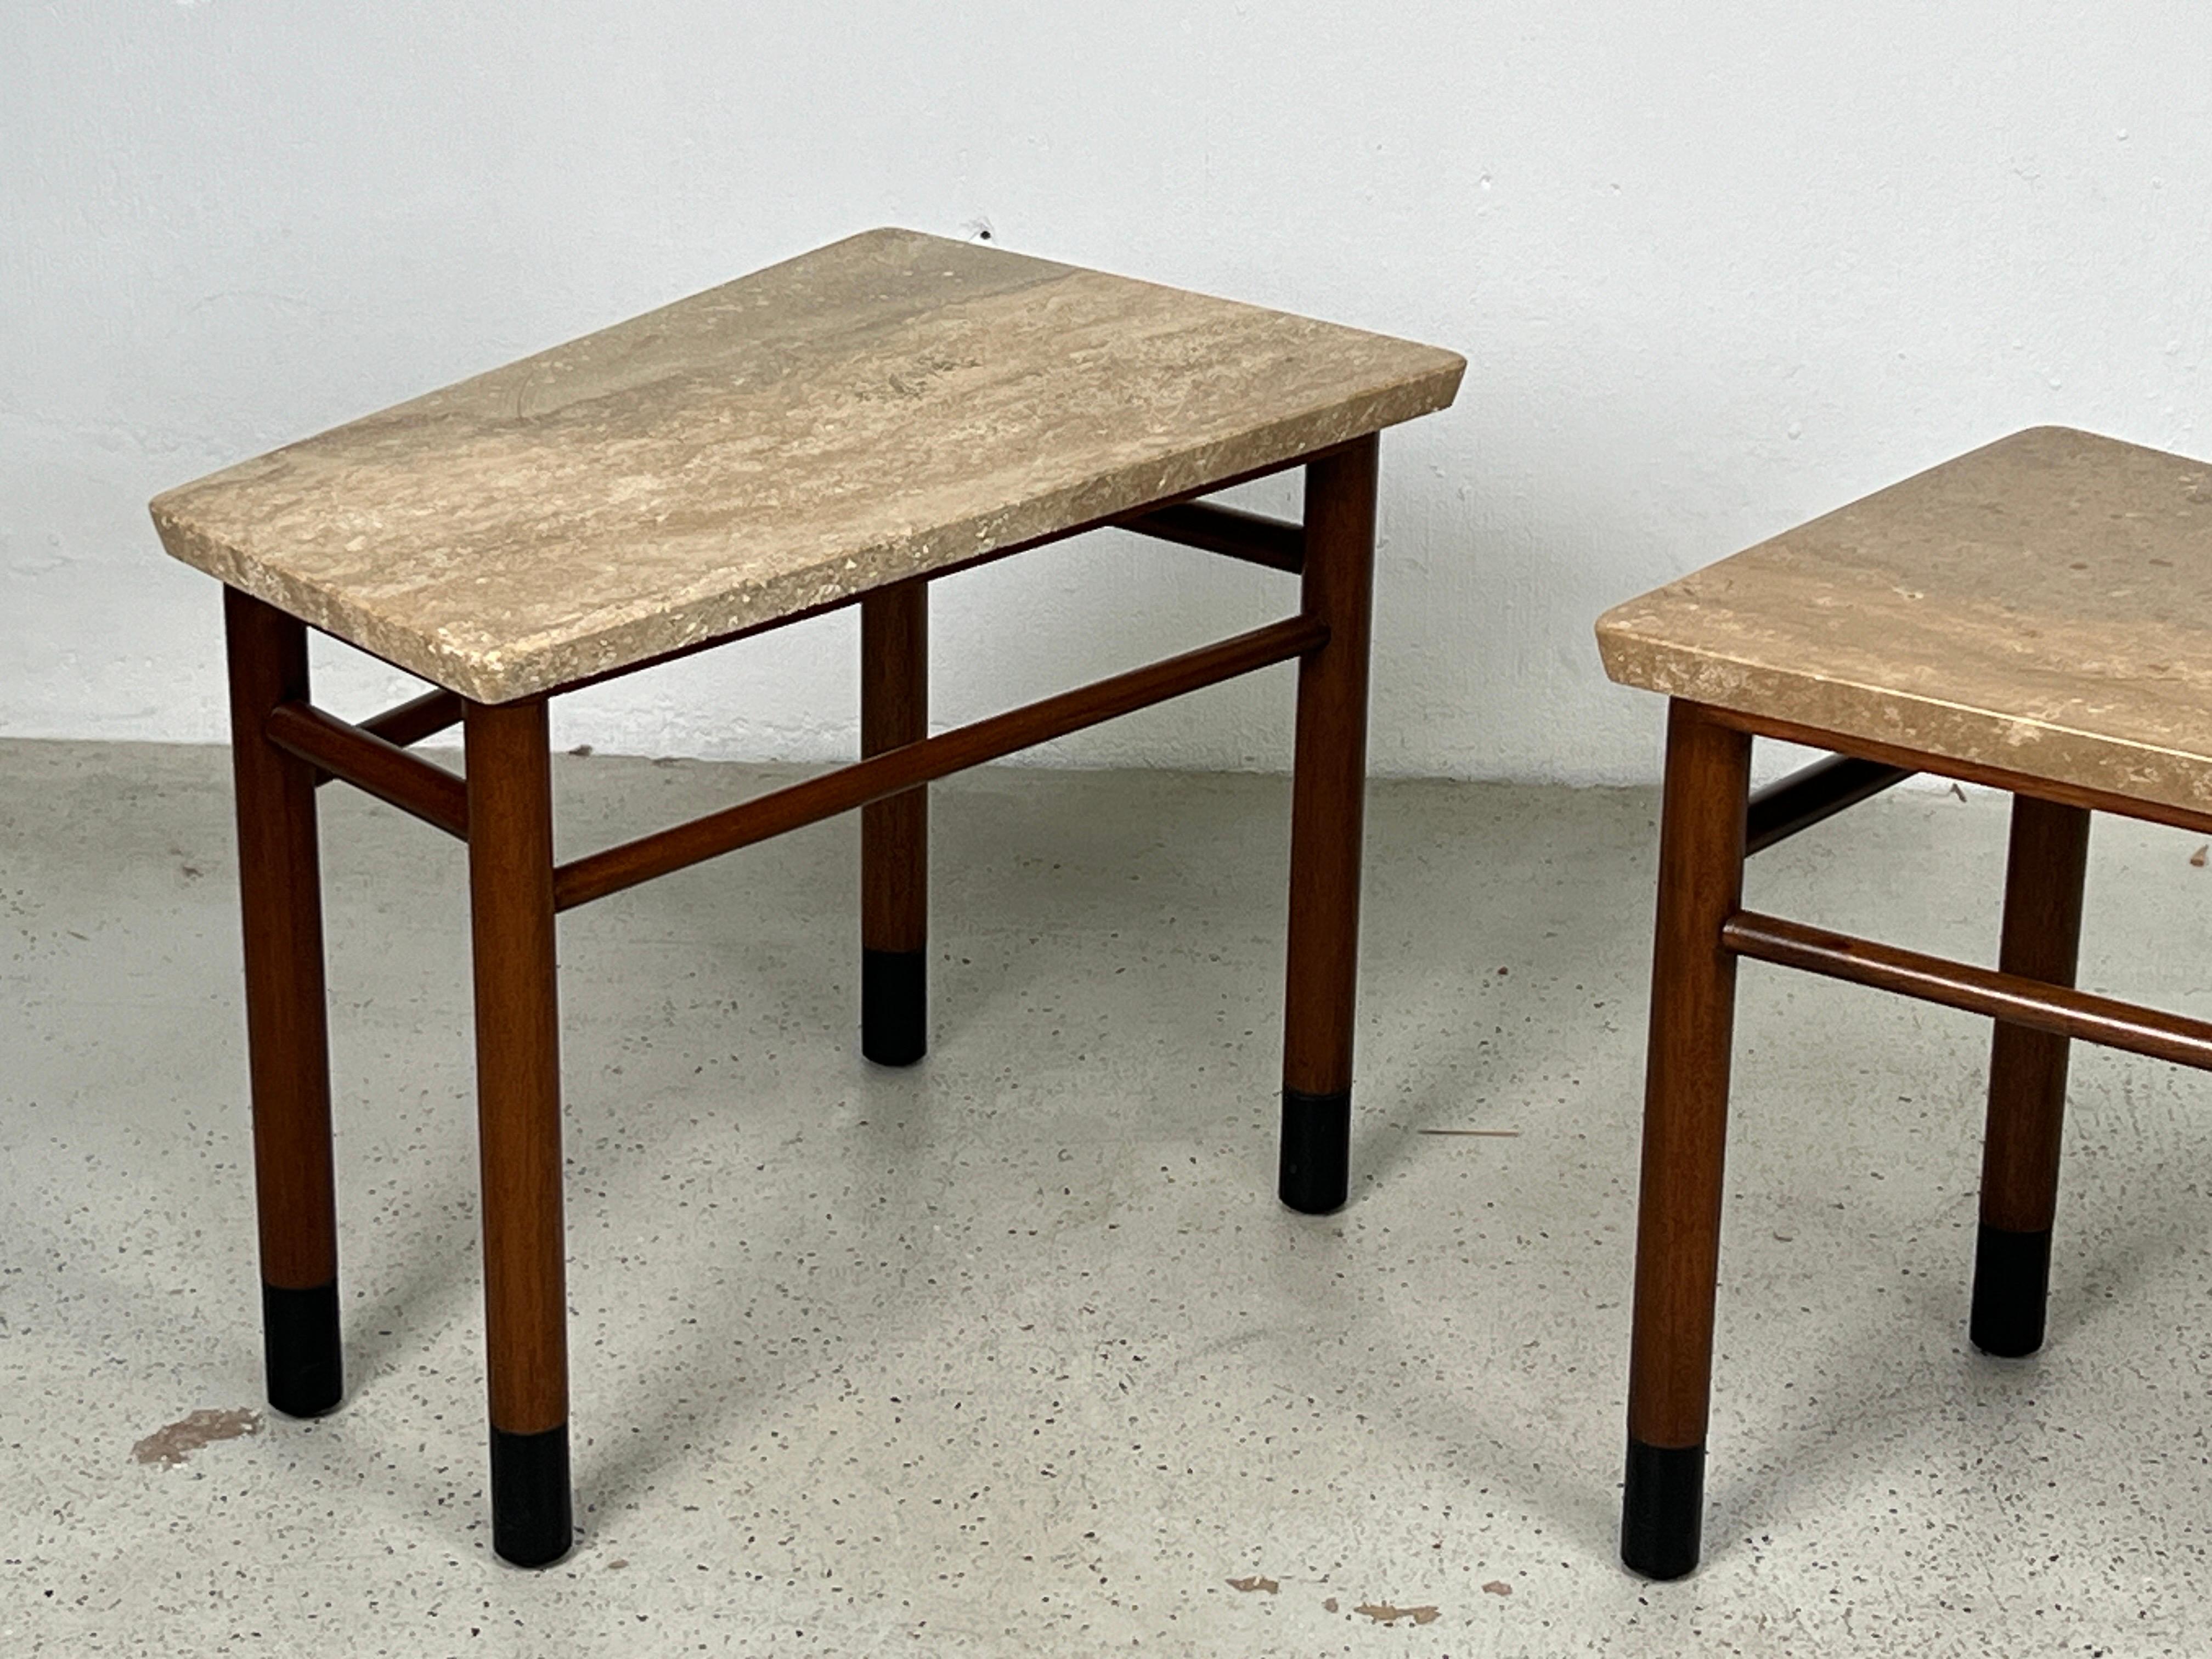 Pair of Wedge Shaped Travertine Tables by Edward Wormley for Dunbar In Good Condition For Sale In Dallas, TX